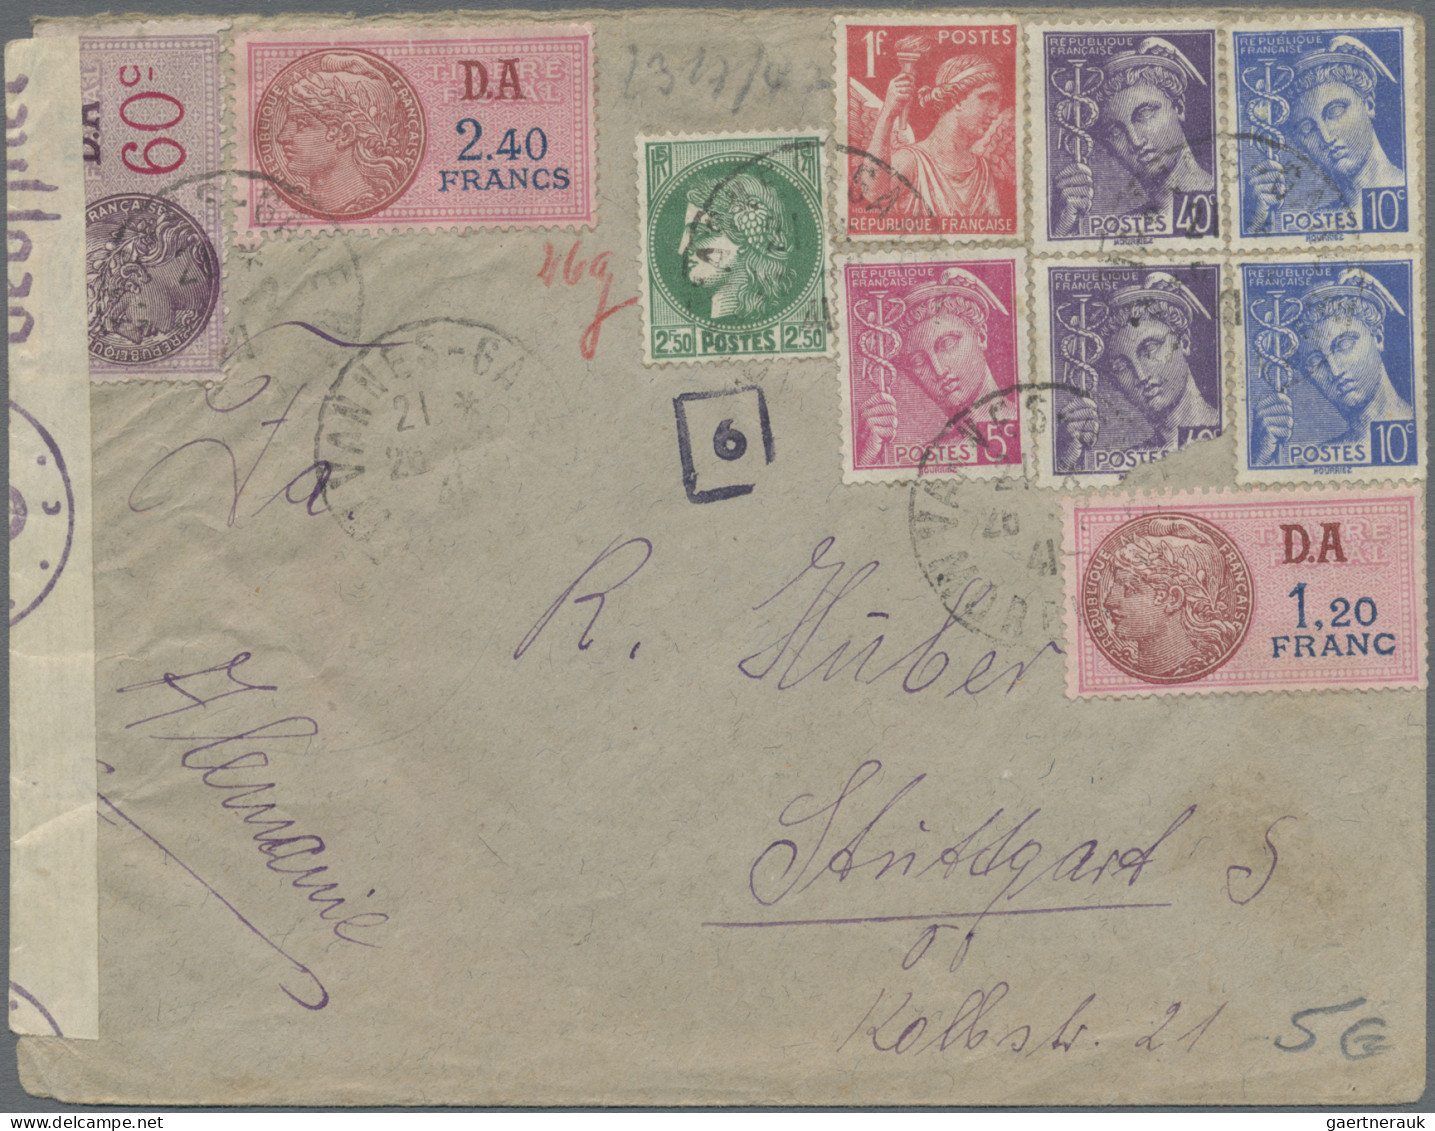 Europe: More than 600 covers, postcards and postal stationery items from Europea